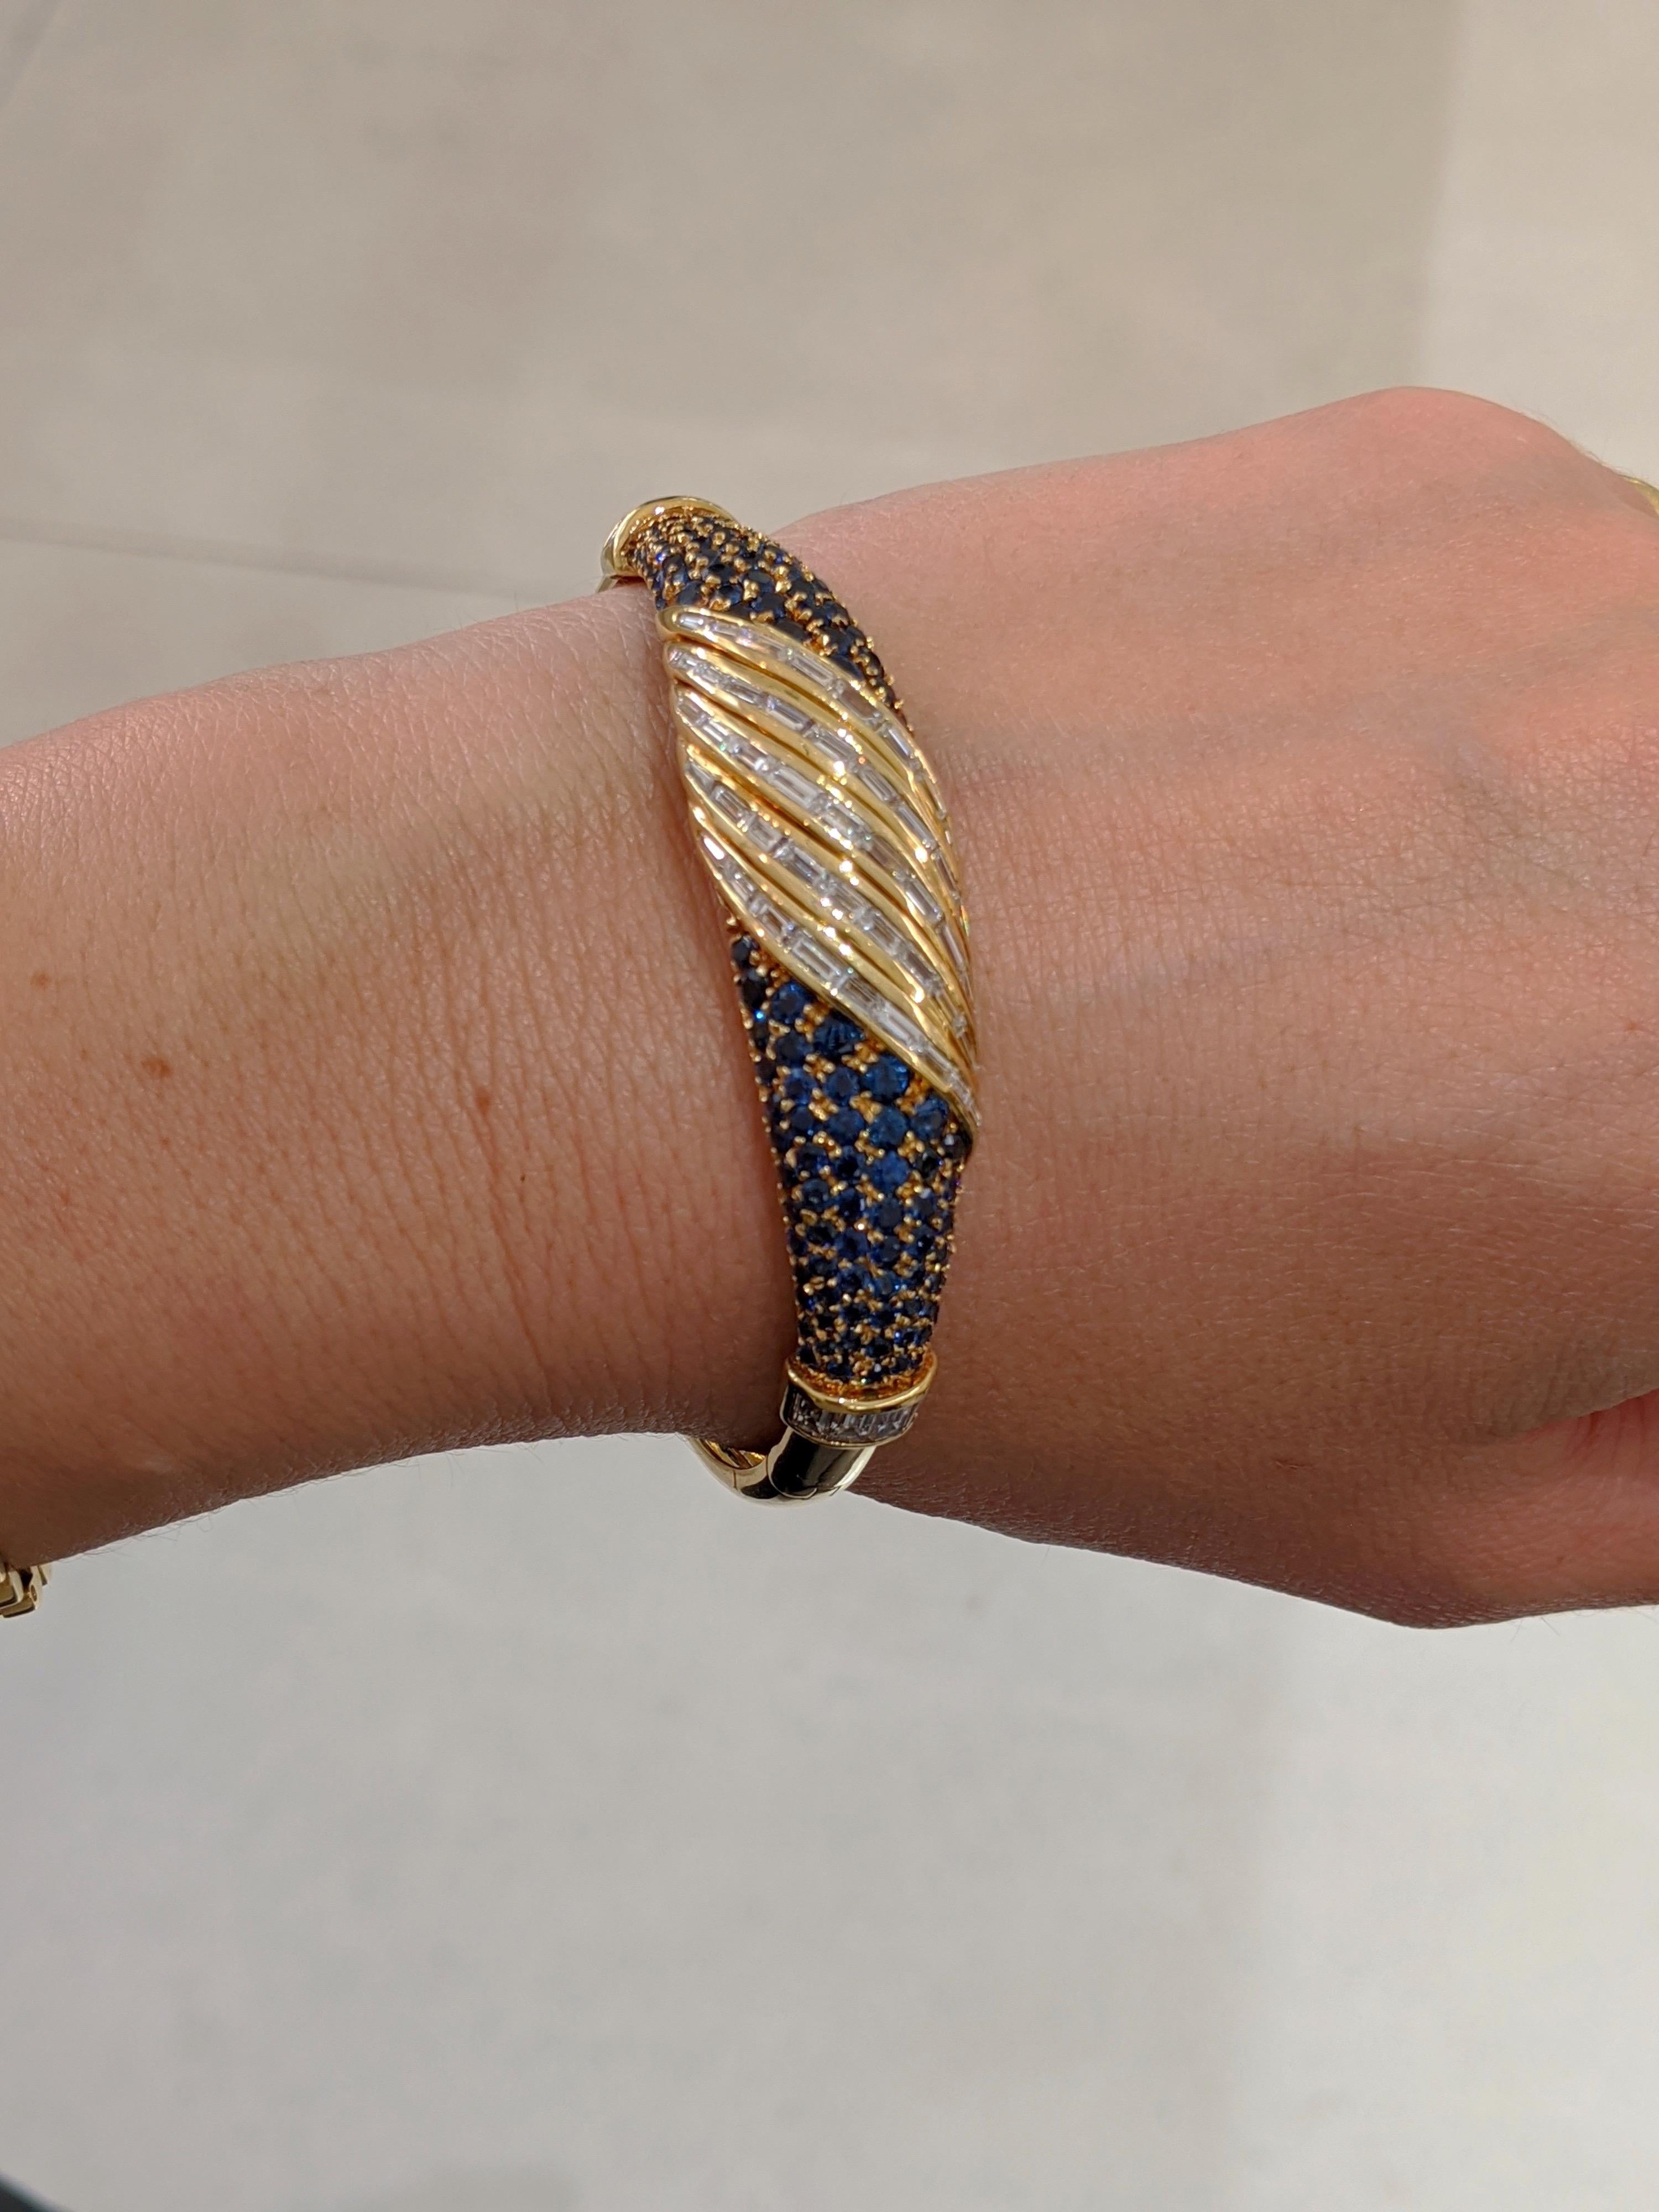 An amazing retro bangle bracelet.  The center swirl section of this 18 karat yellow gold bangle has been invisibly set with Baguette Cut Diamonds. The two side sections are set with round  Brilliant Cut Blue sapphires. The inside measurements of the